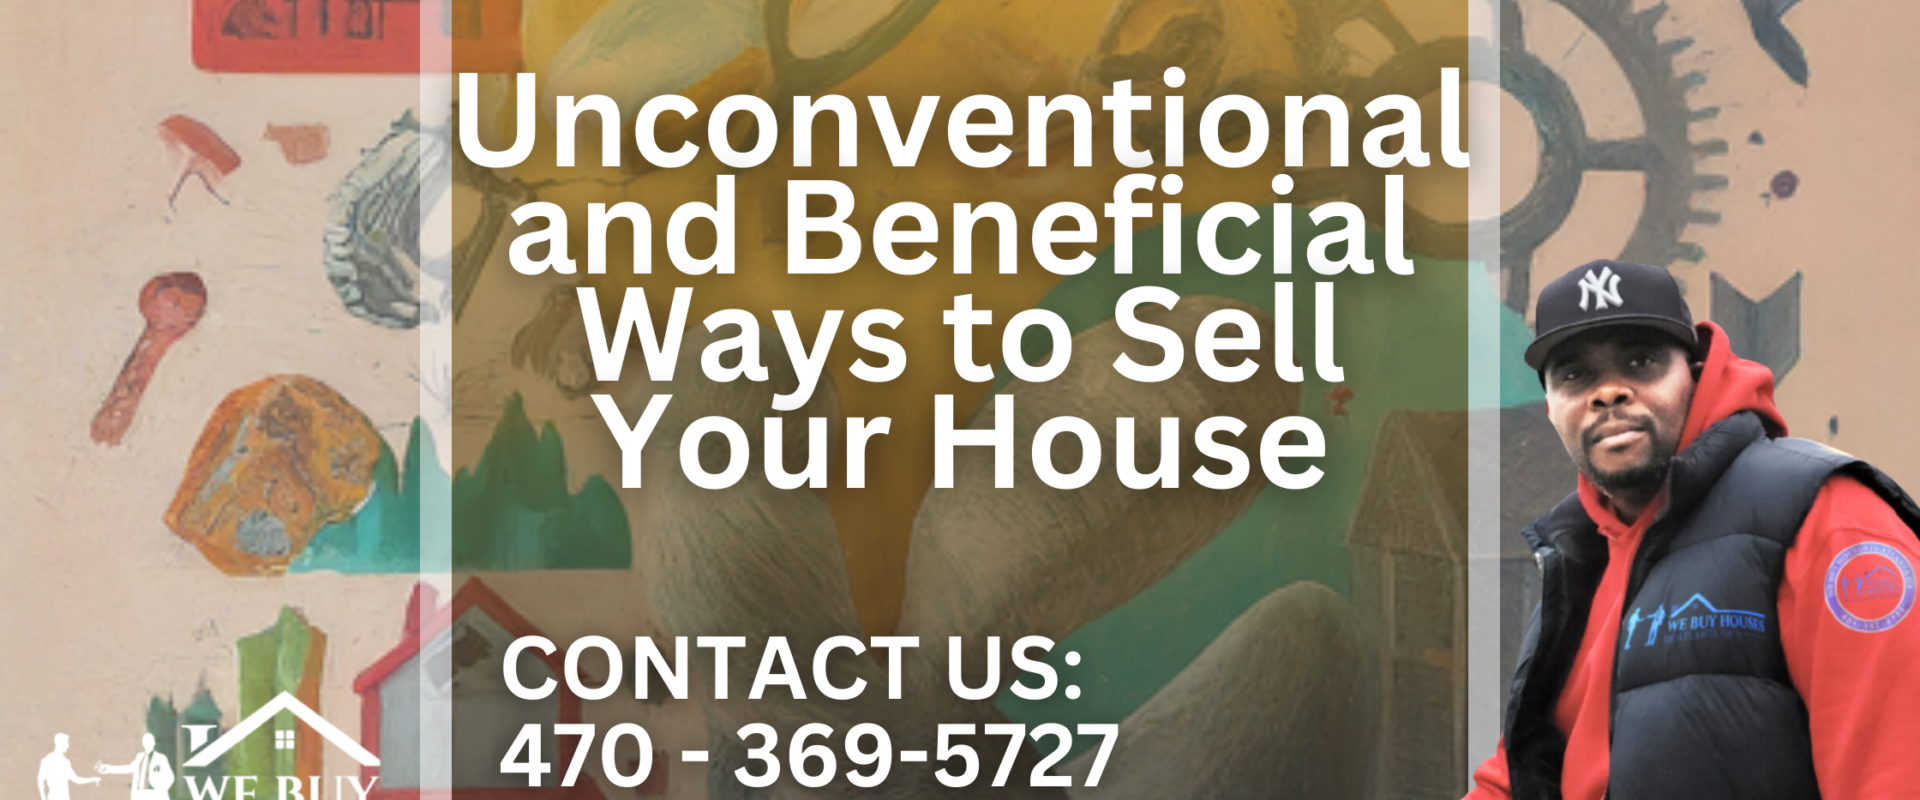 3 Unconventional and Beneficial Ways to Sell Your House